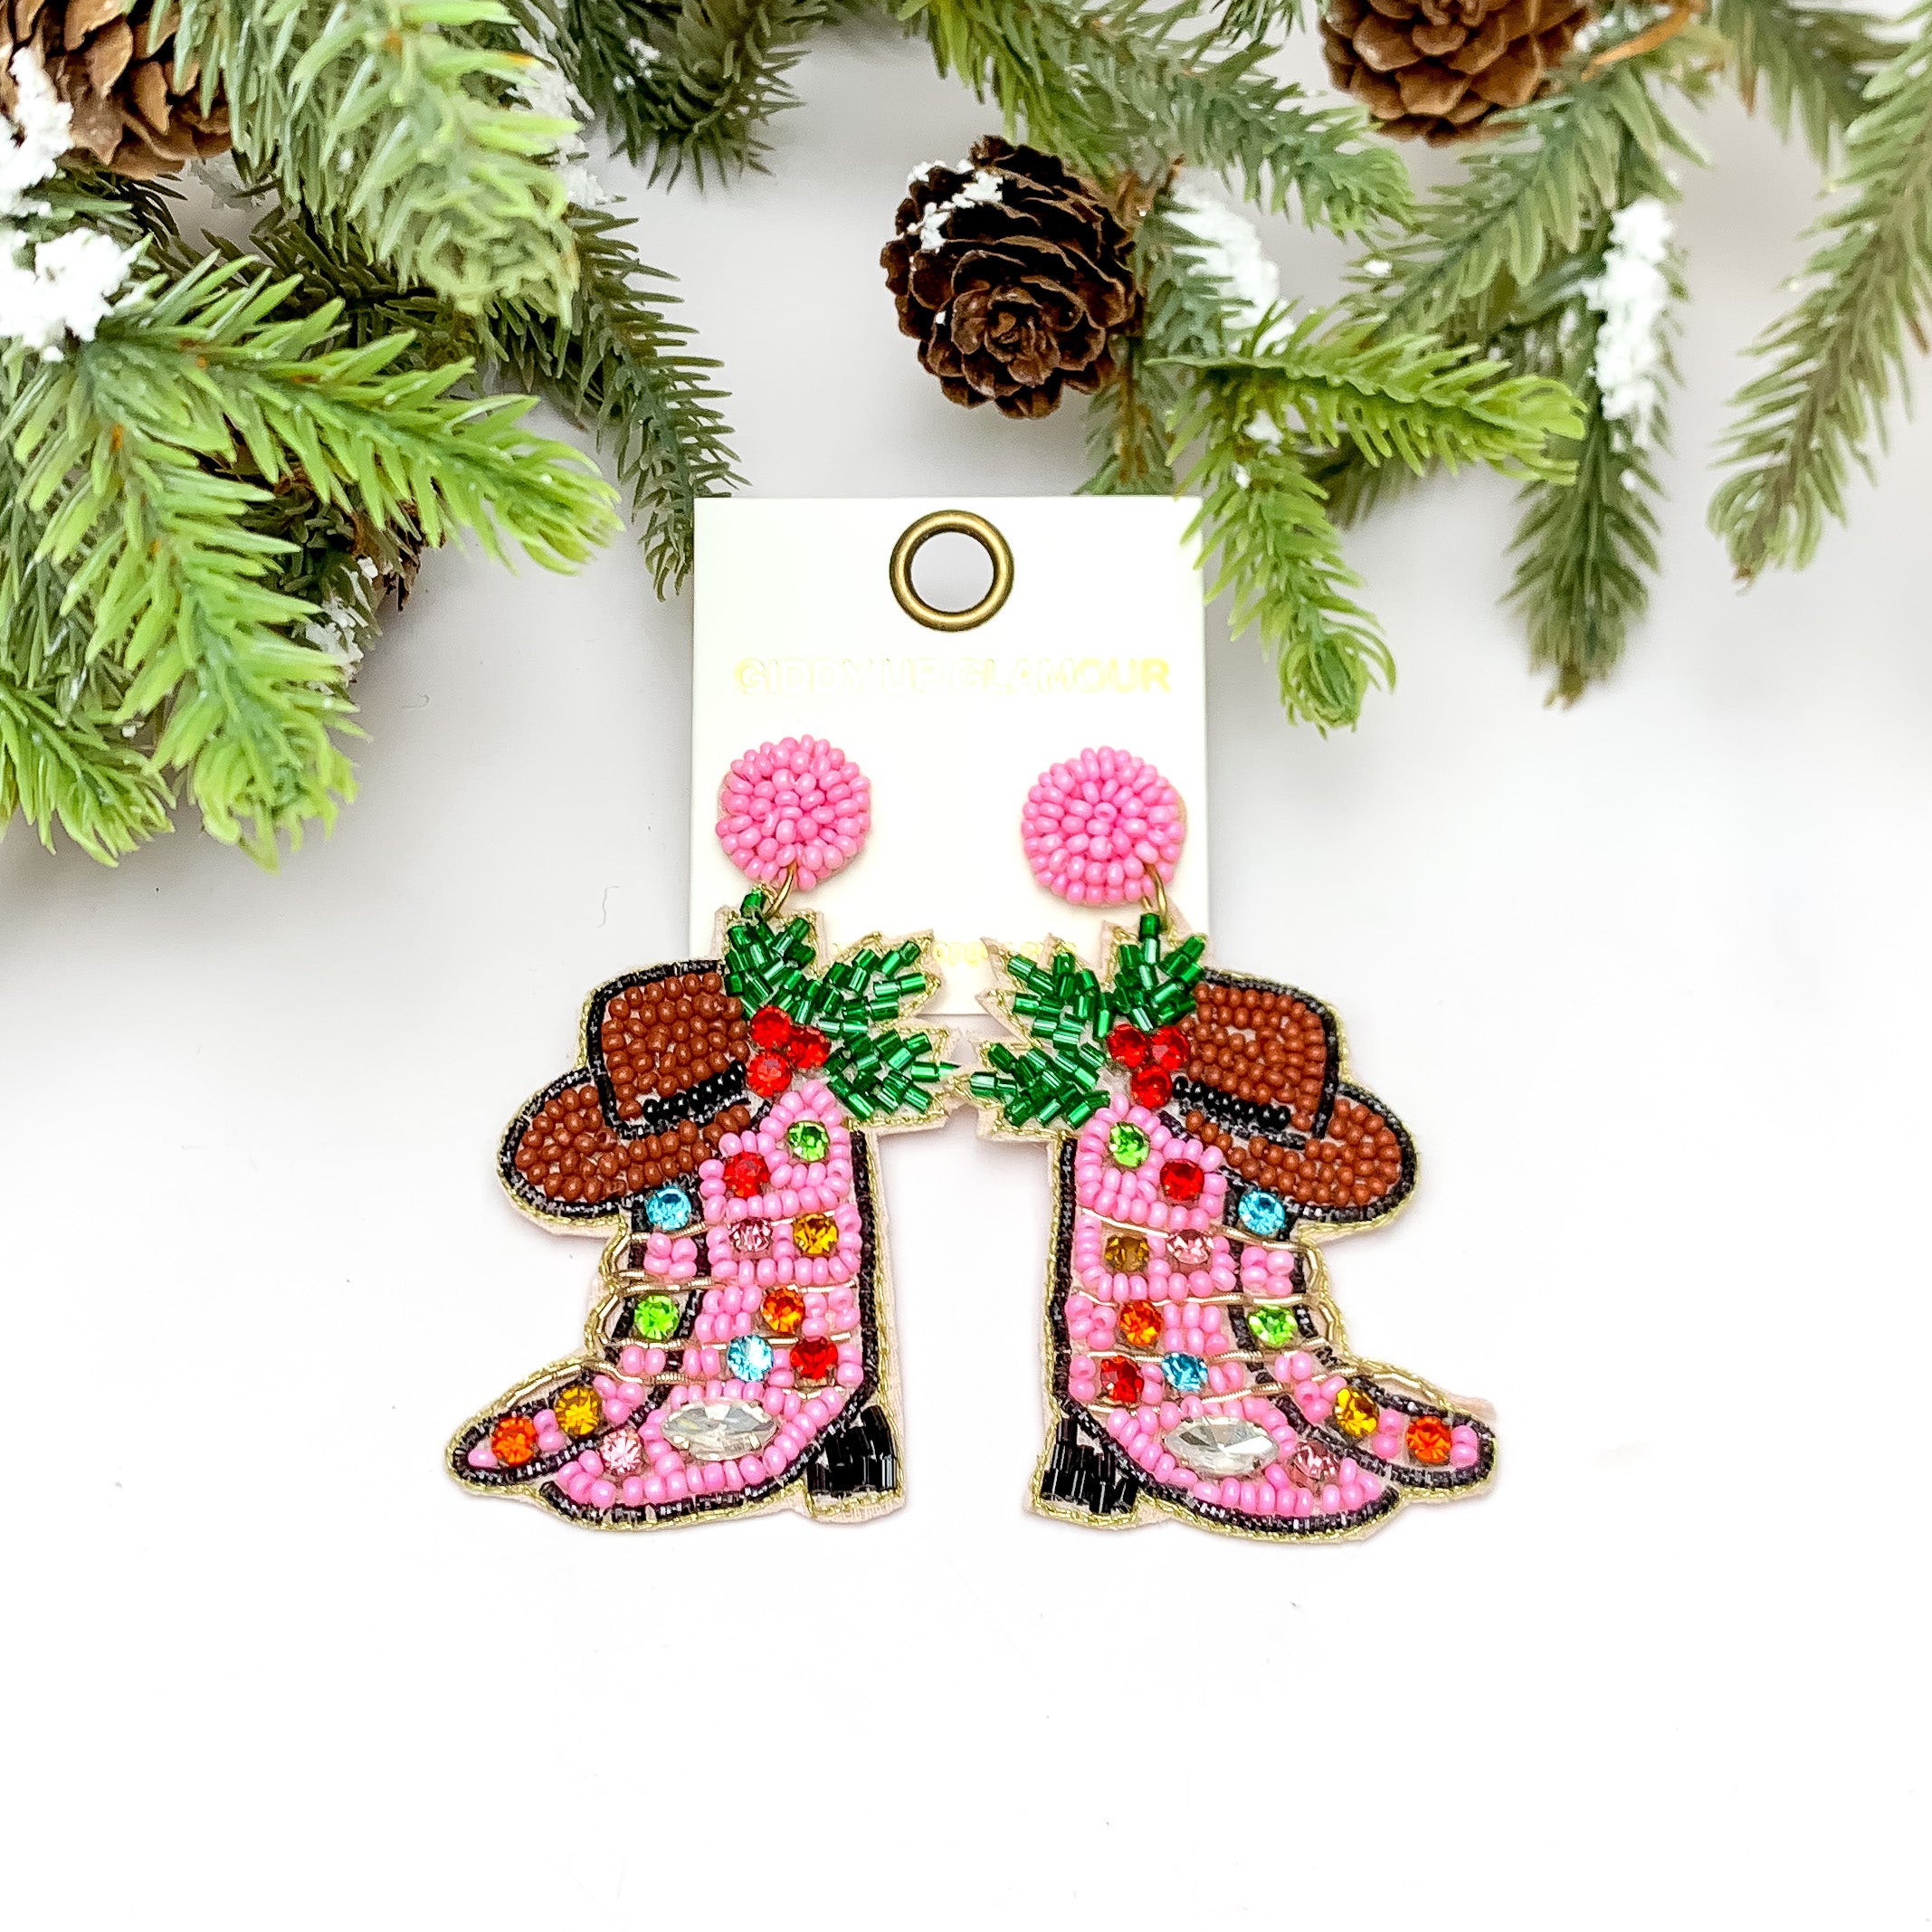 Cowgirl Christmas Beaded Boot Earrings in Pink. These earrings are pictured on a white background with a tree and pine cones at the top.